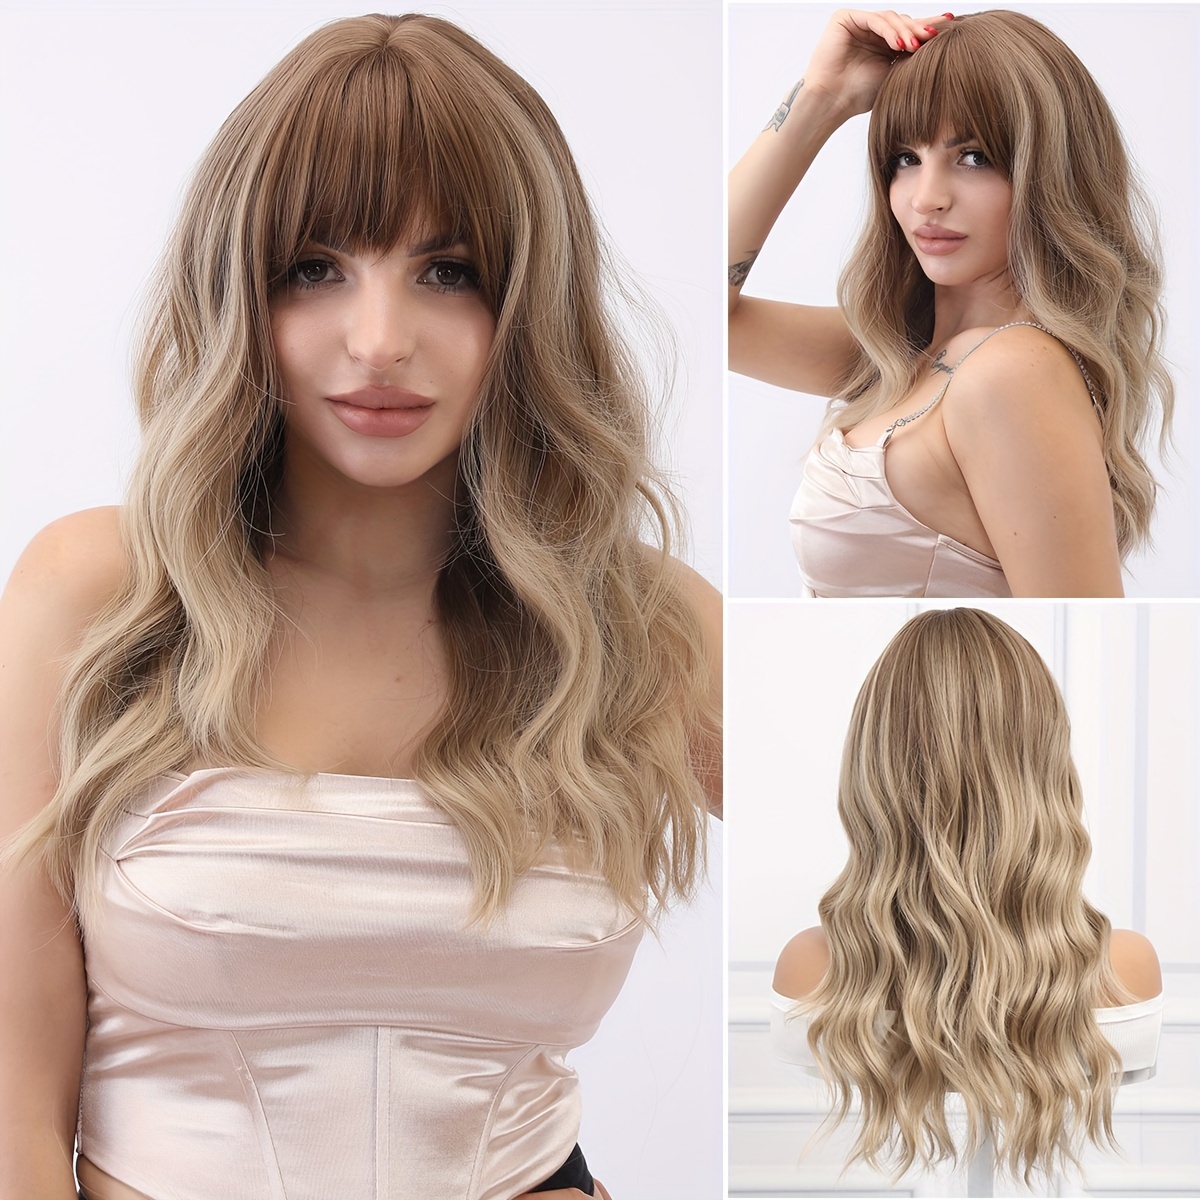 

Smilco 22inch Fashionable And Elegant Women's Gold Spot Dyed Liu Hai Synthetic Curled Hair Wig - Heat Resistant, Easy To Shape, Paired With Comfortable Rose Mesh Hat, Creating Daily Style